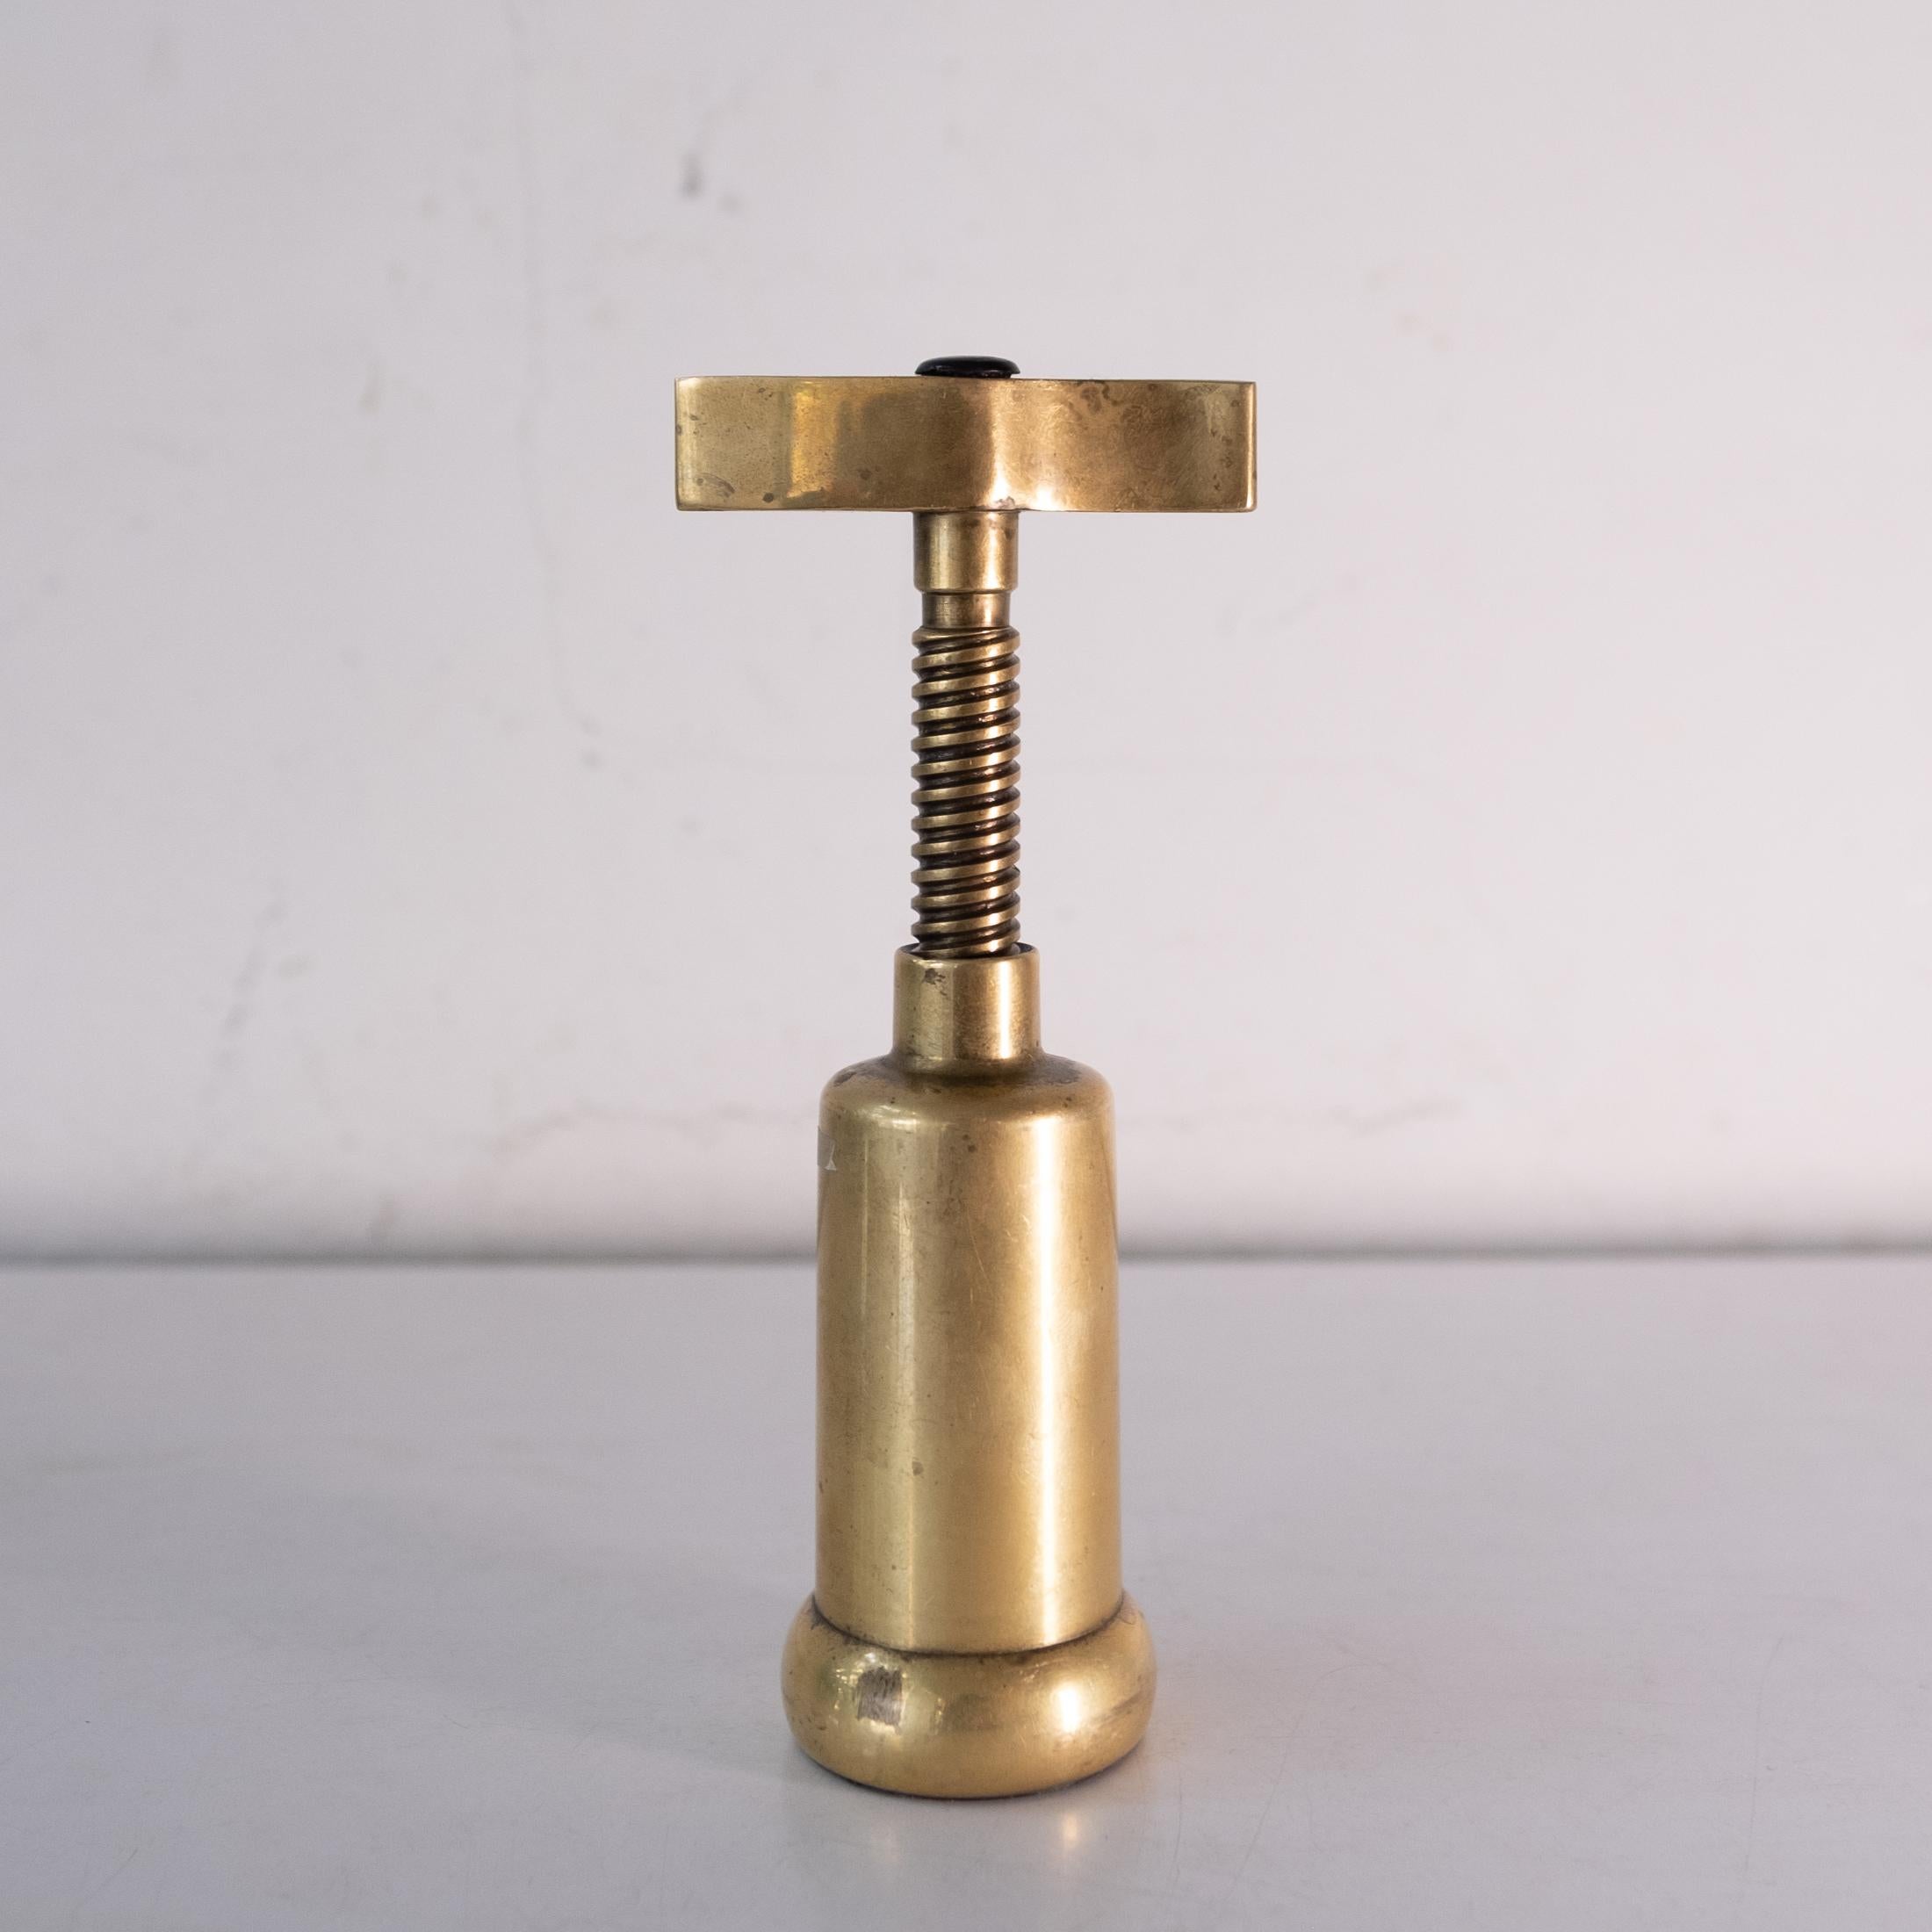 High quality solid brass corkscrew from the 1970s.